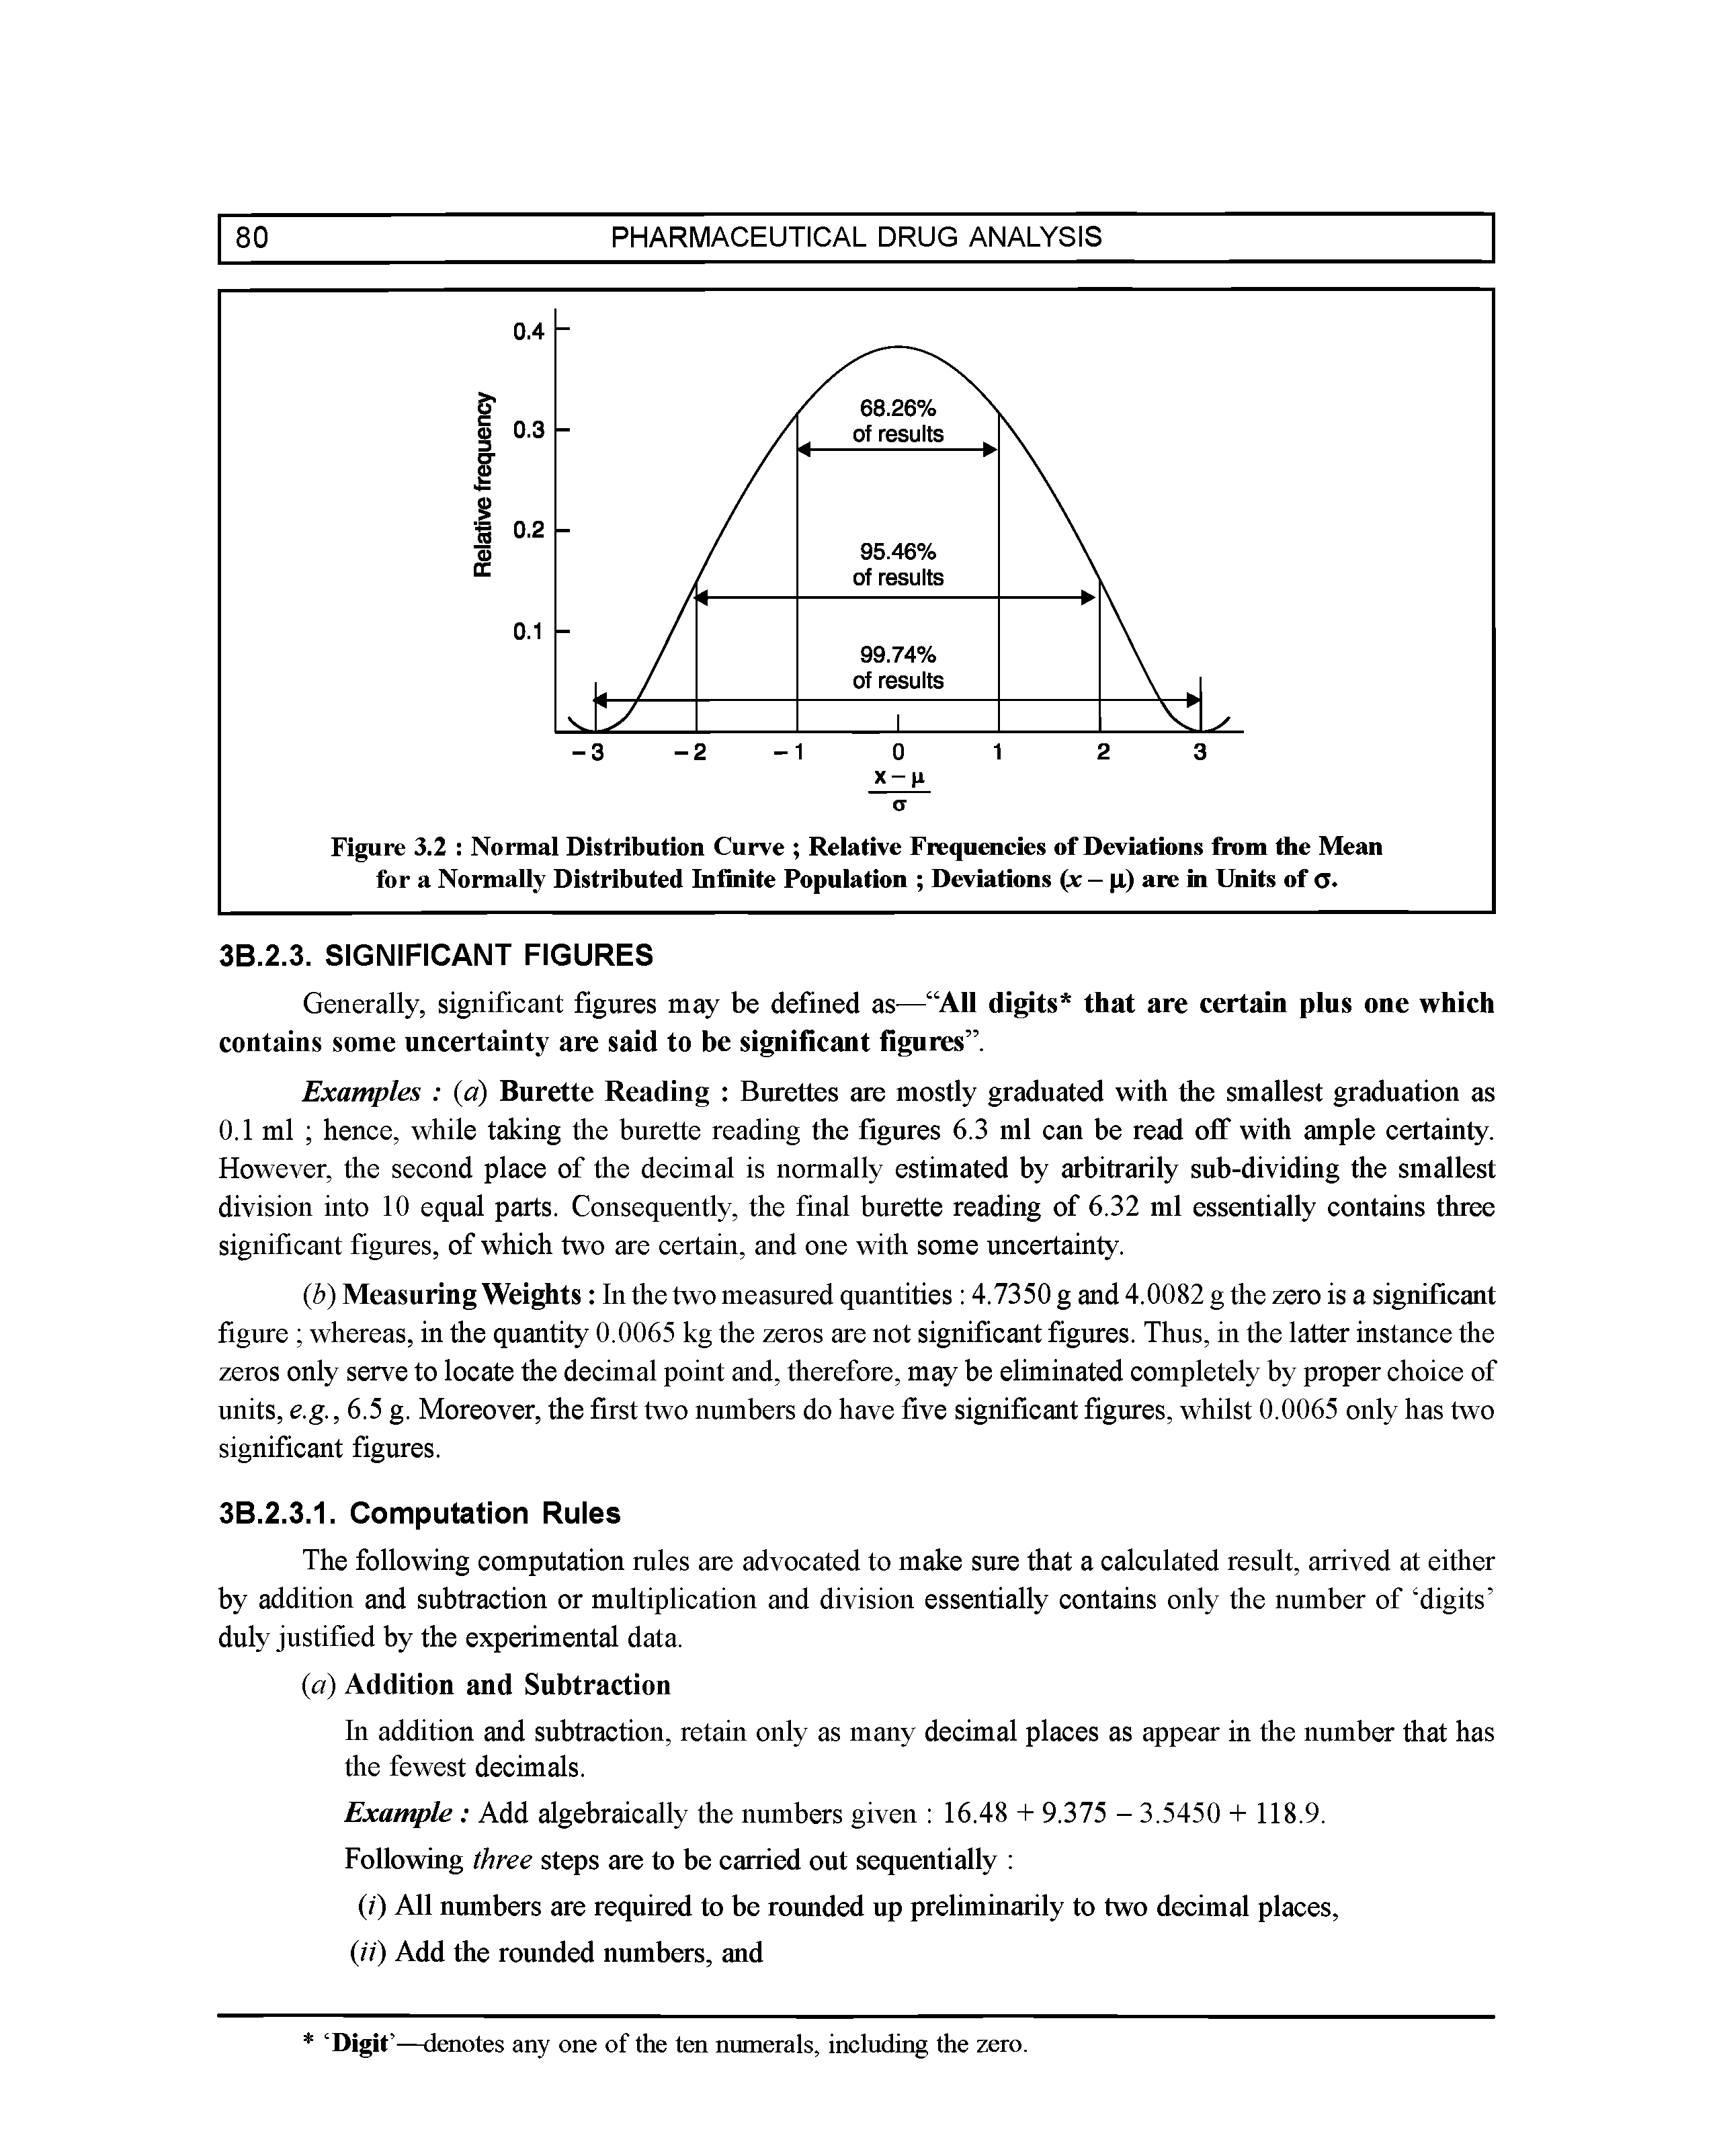 Figure 3.2 Normal Distribution Curve Relative Frequencies of Deviations from the Mean for a Normally Distributed Infinite Population Deviations (x - p) are in Units of a.